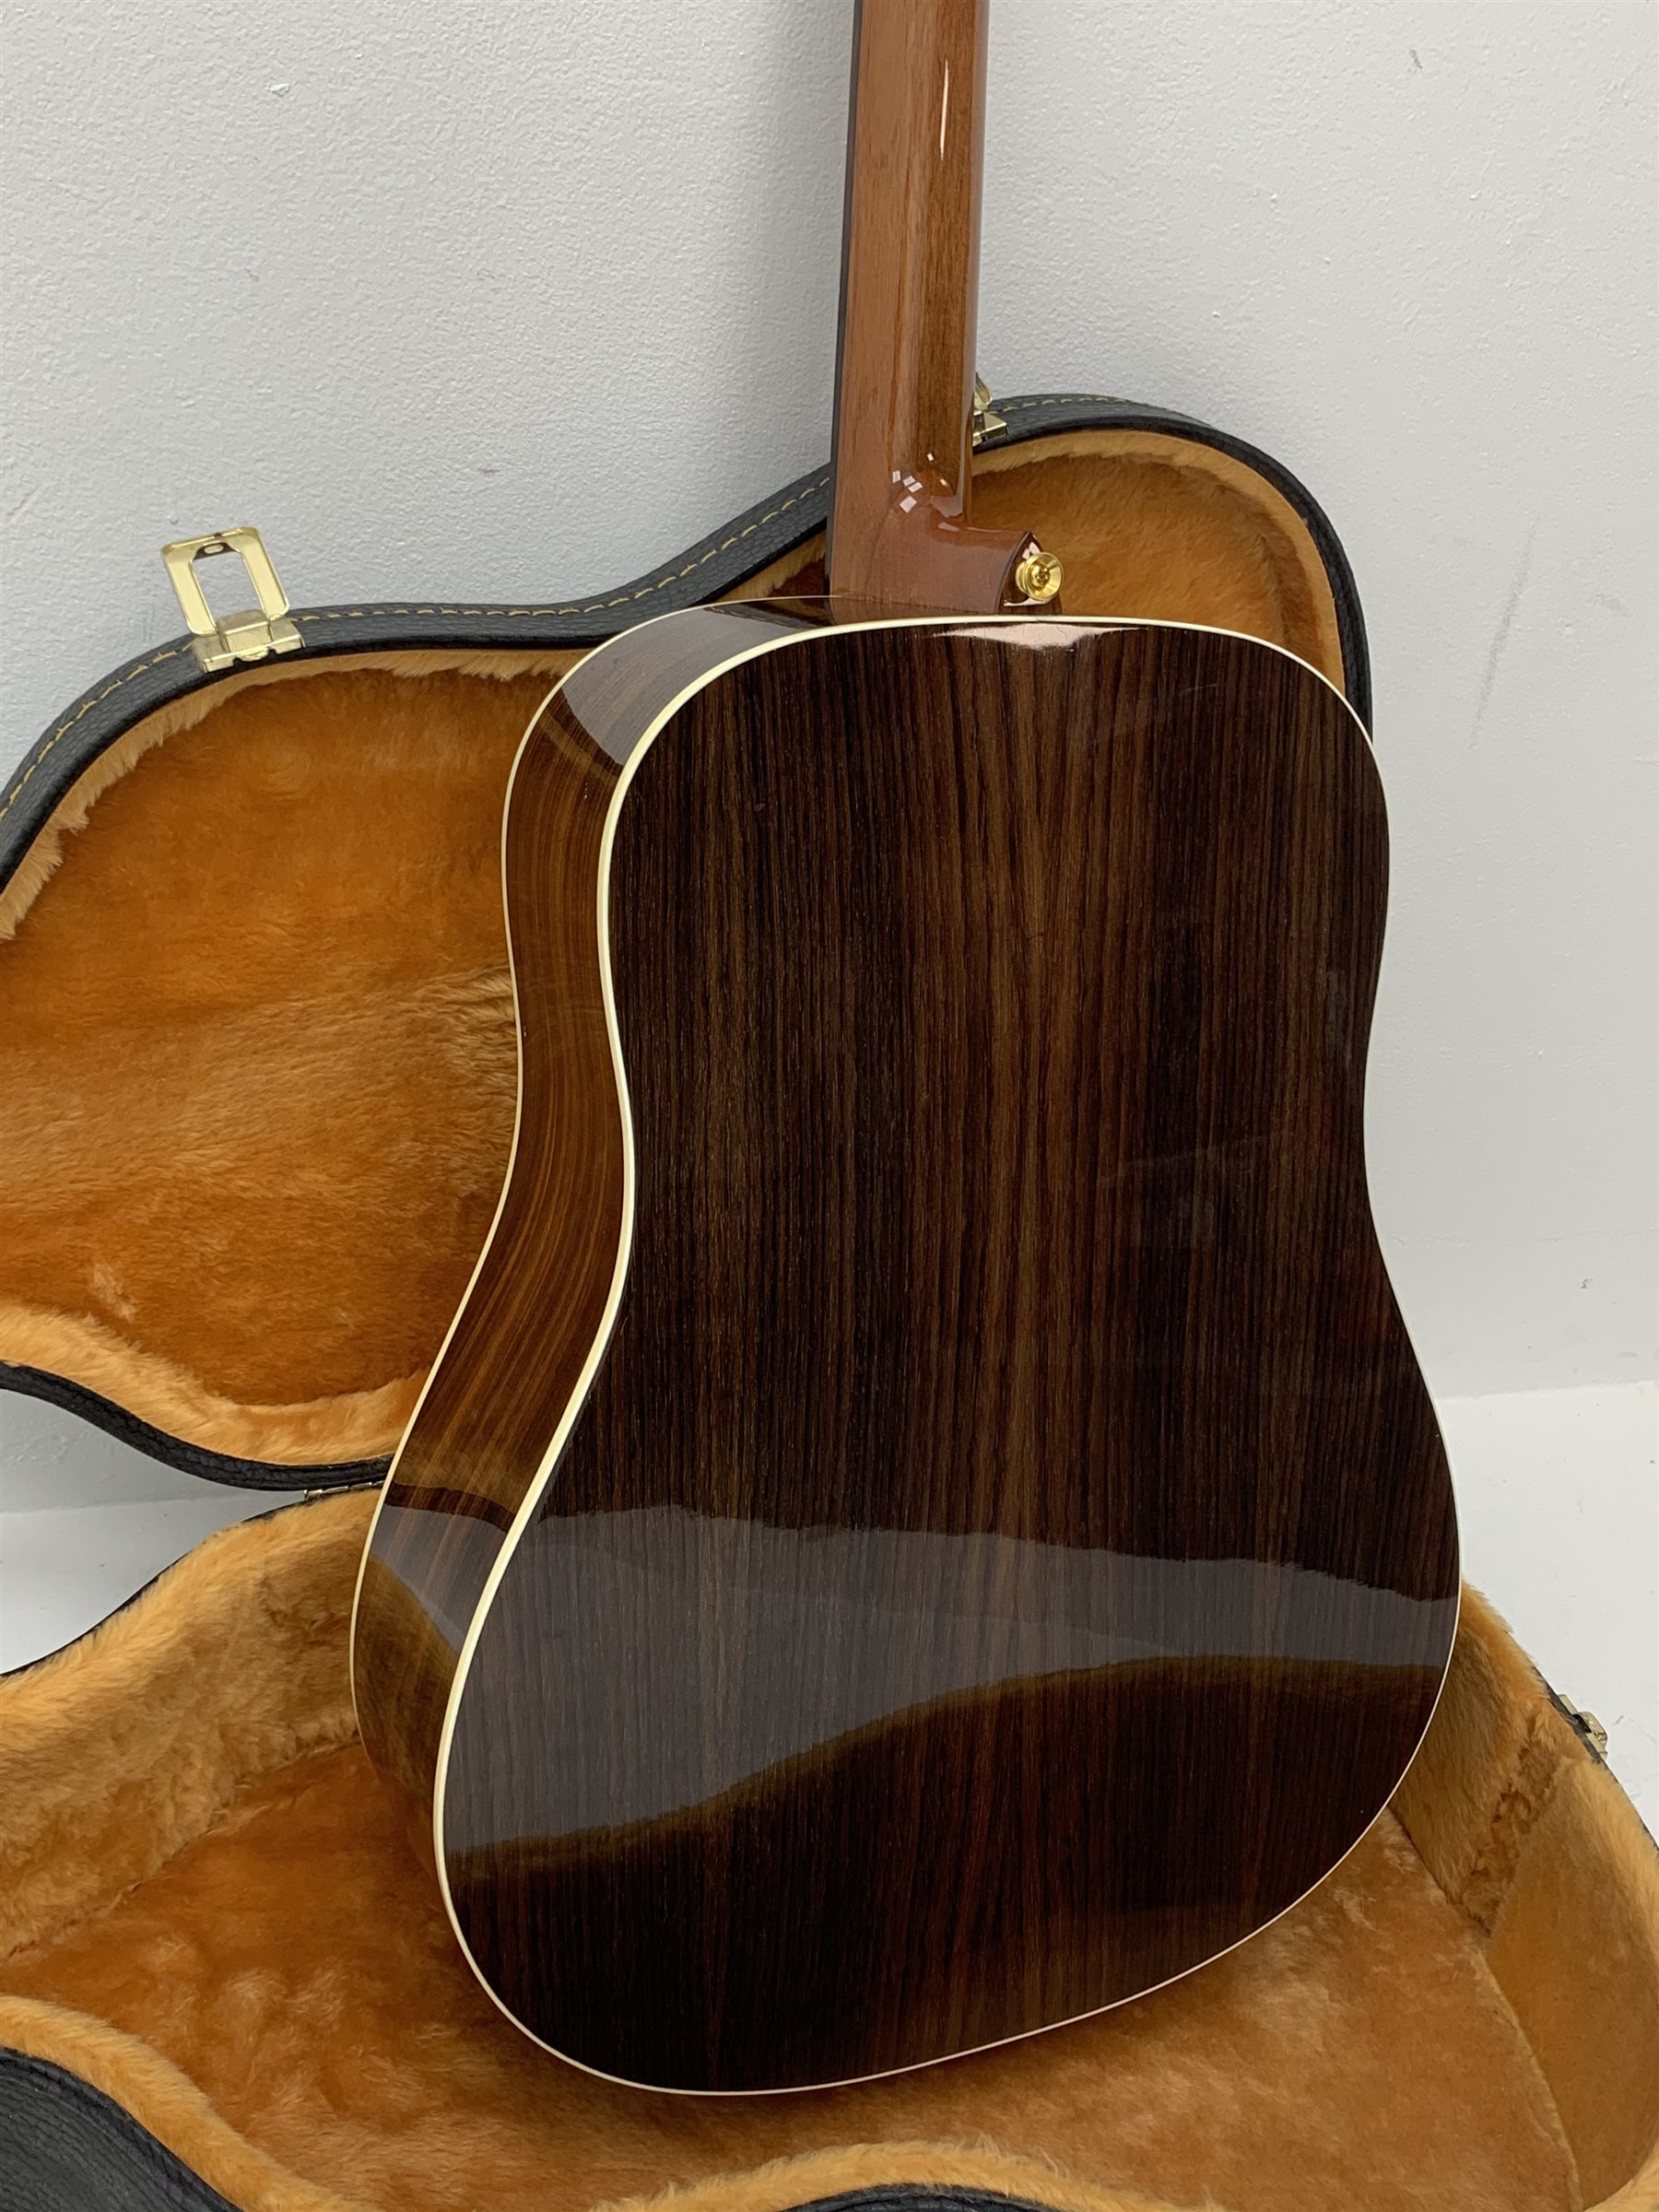 Ayers DSRL acoustic guitar designed by Gerard Gilet, rosewood back and sides and a spruce top rosewo - Image 6 of 7